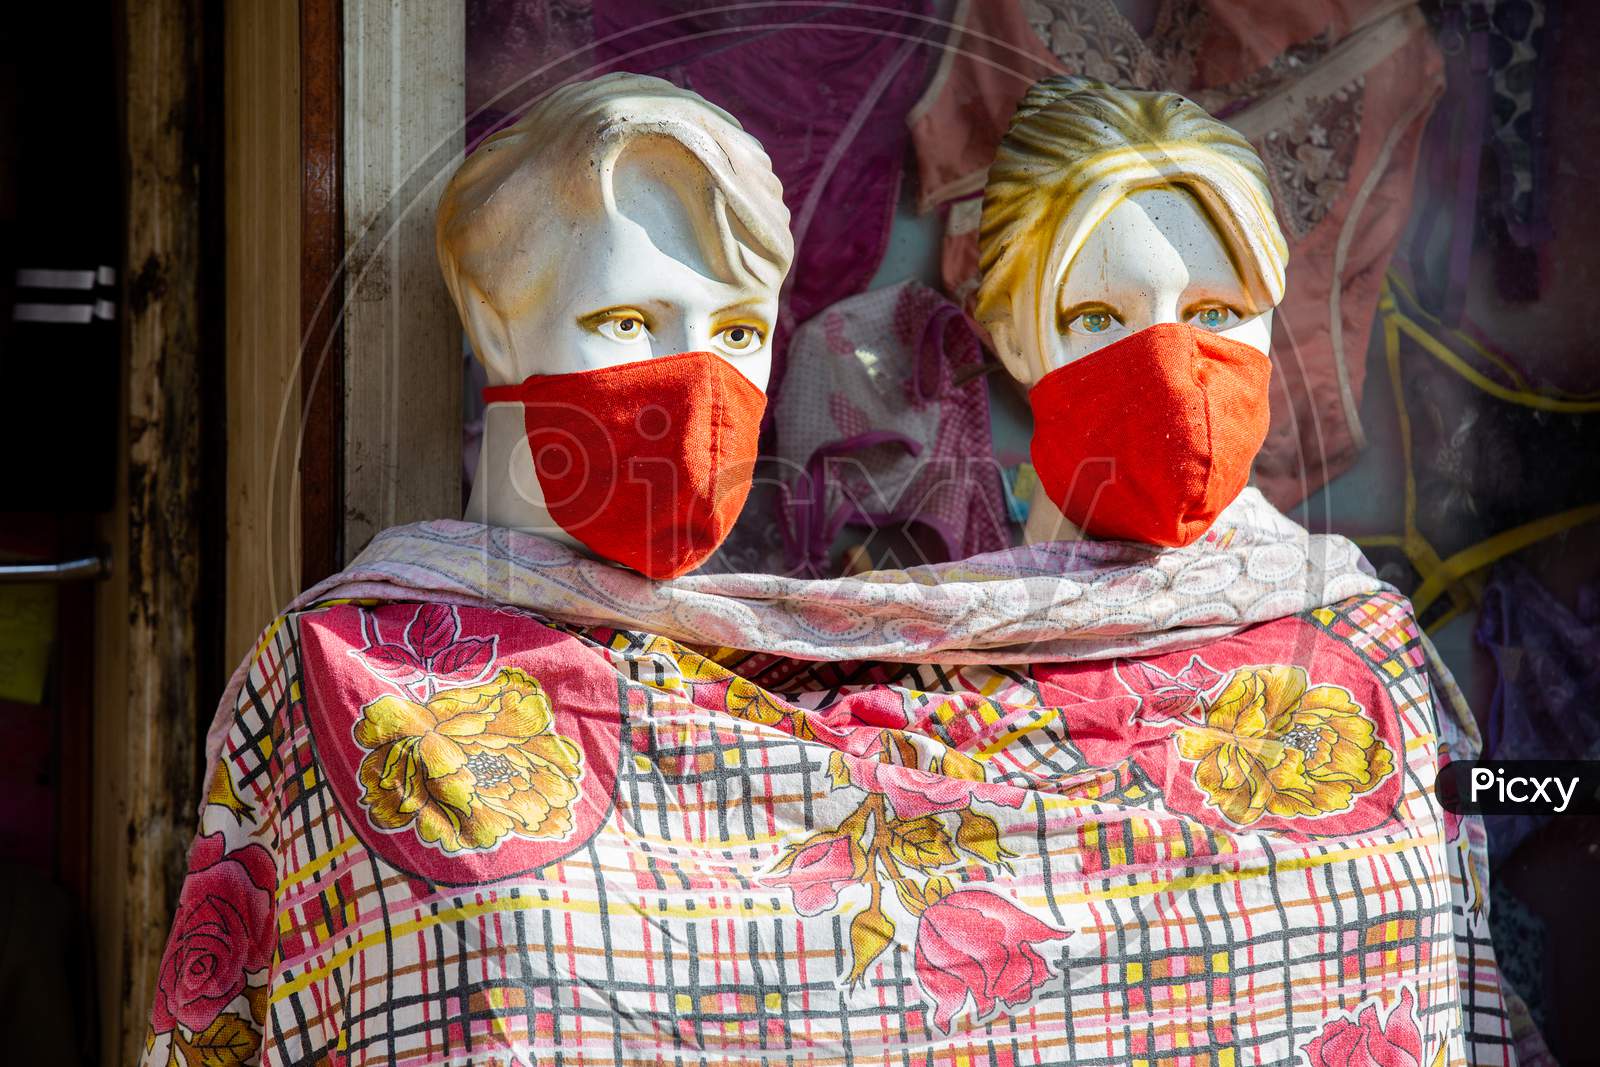 Two Female Mannequins With Mask On Face. Shops Are Reopening After Lock Down Restrictions Due To The Covid-19 Pandemic, Back To Normal Life With Few Safety Measure.